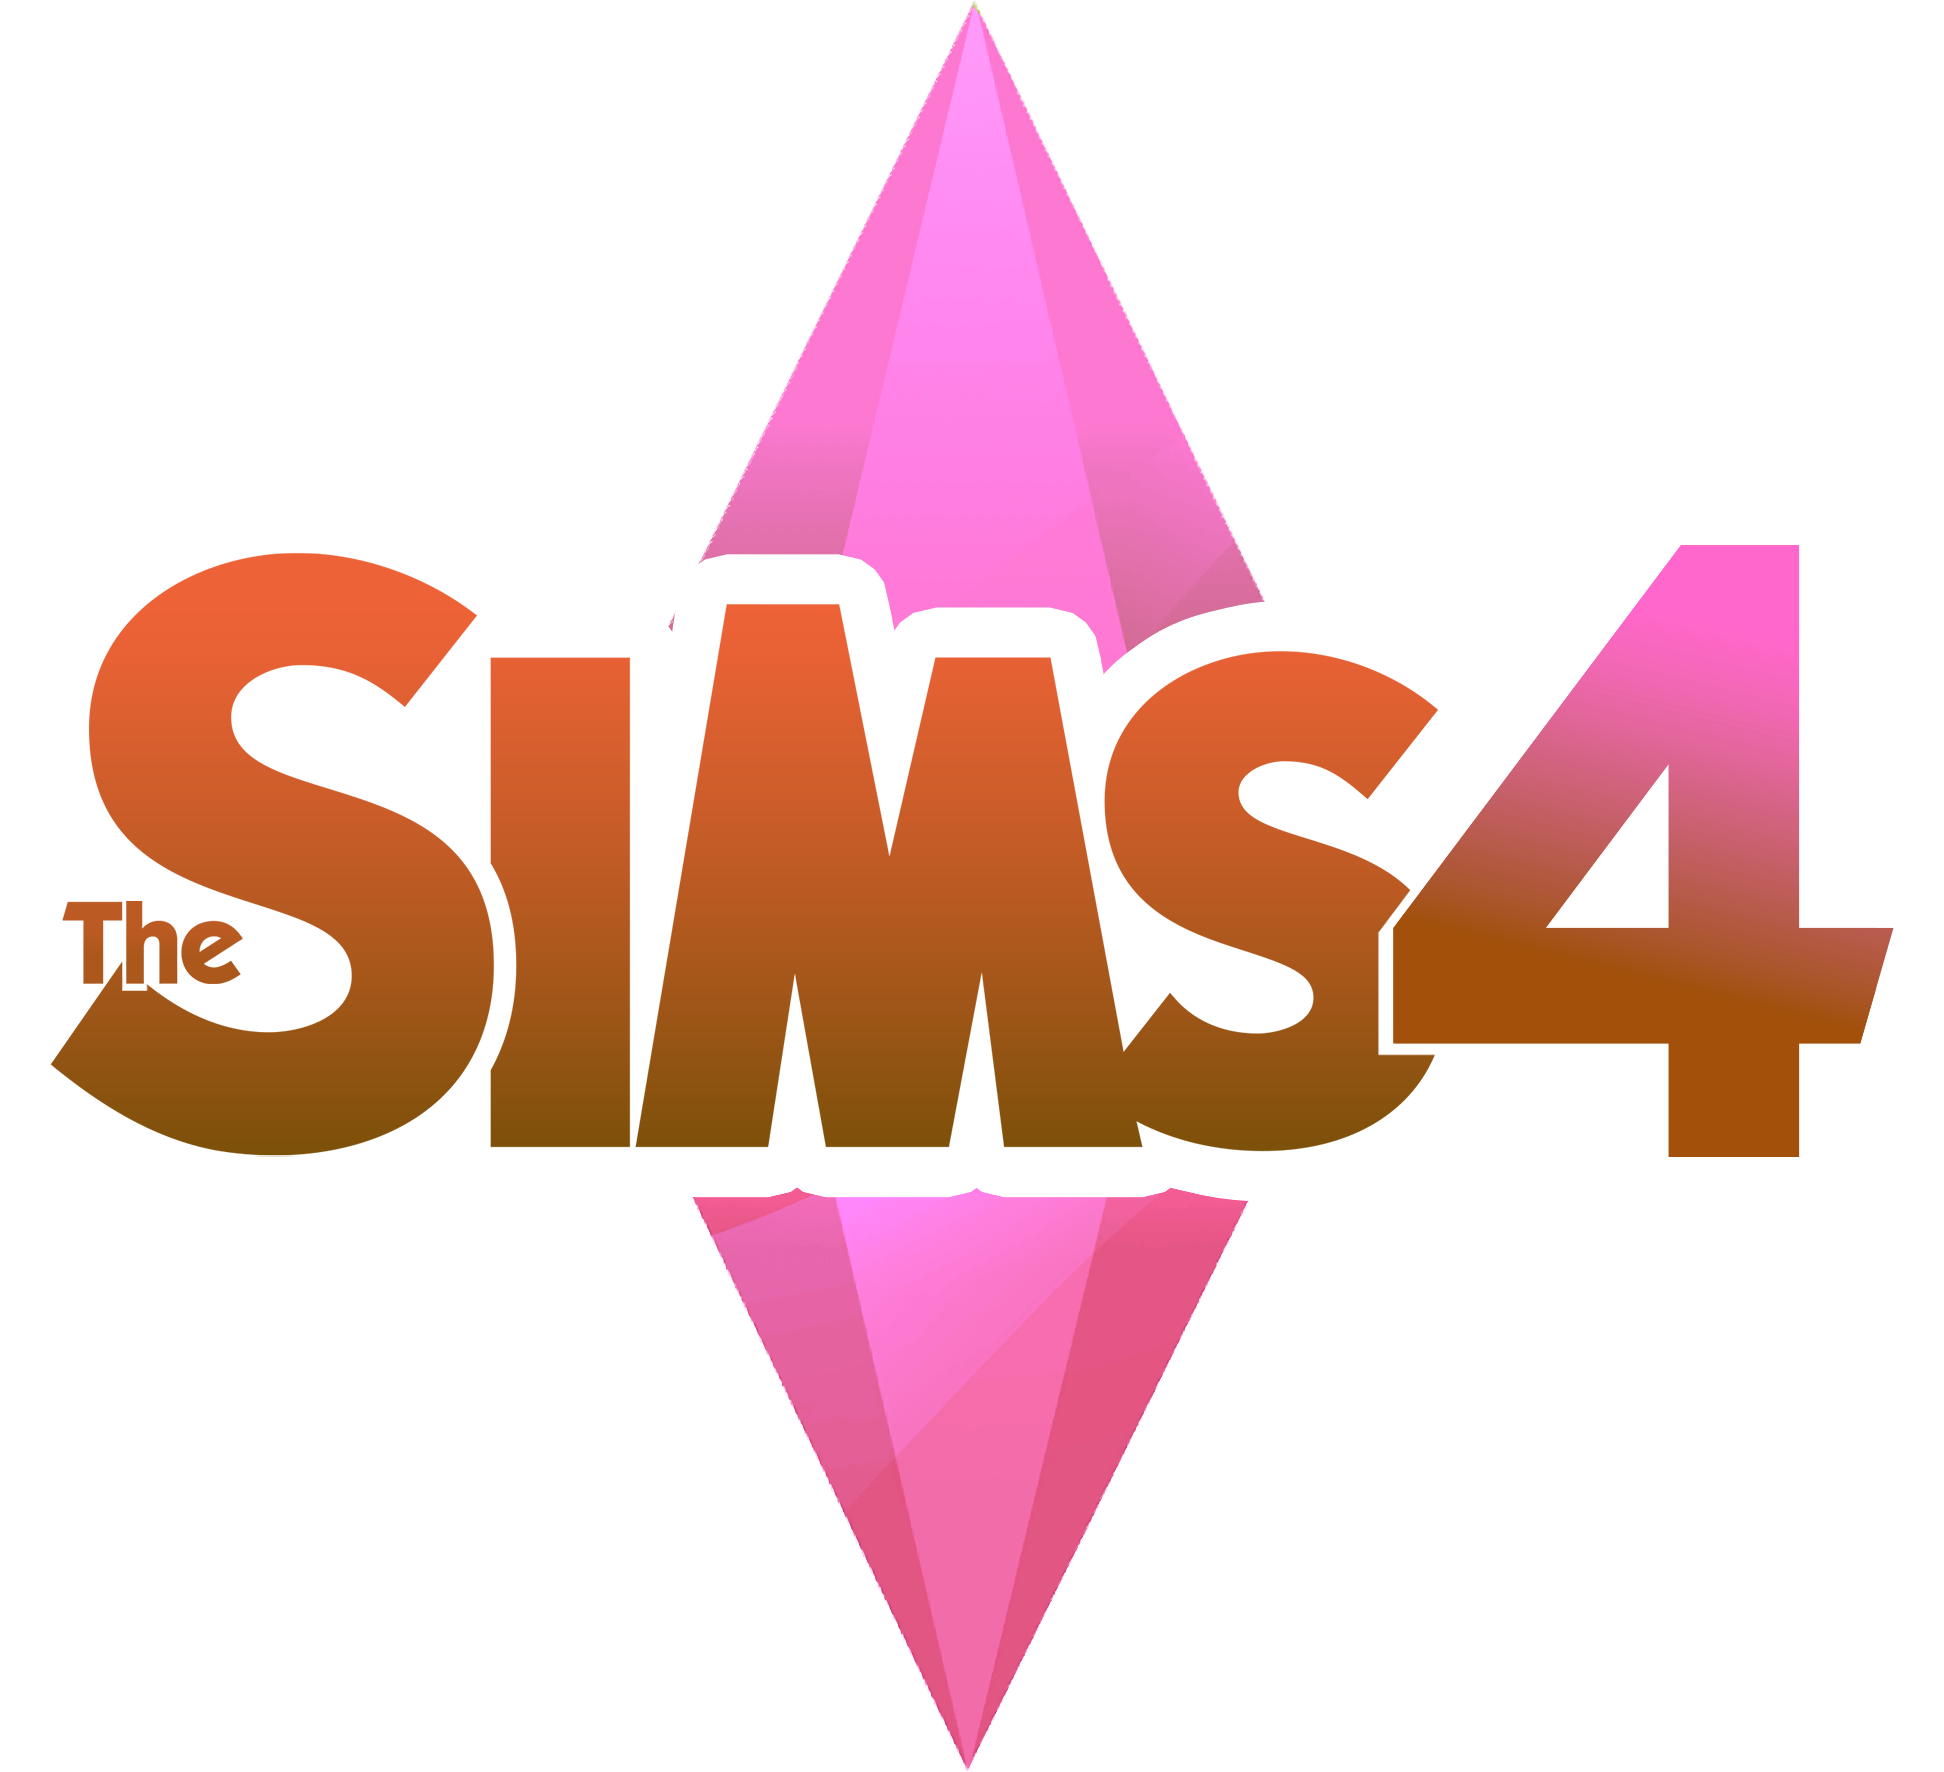 File:Logo of The Sims (2013).png - Wikimedia Commons